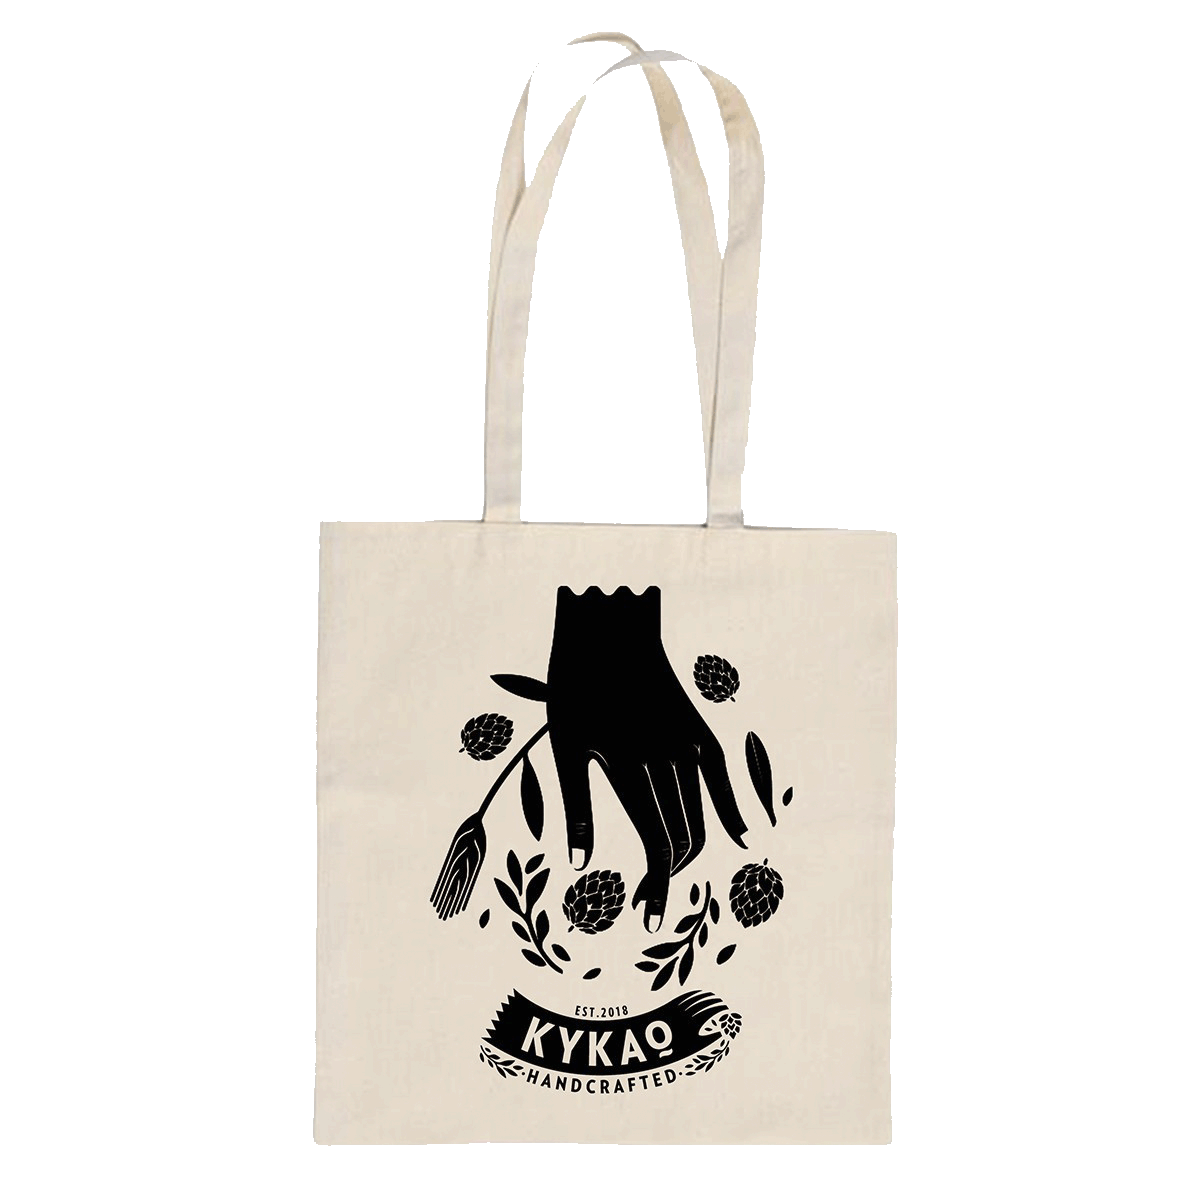 Kykao Tote Bags